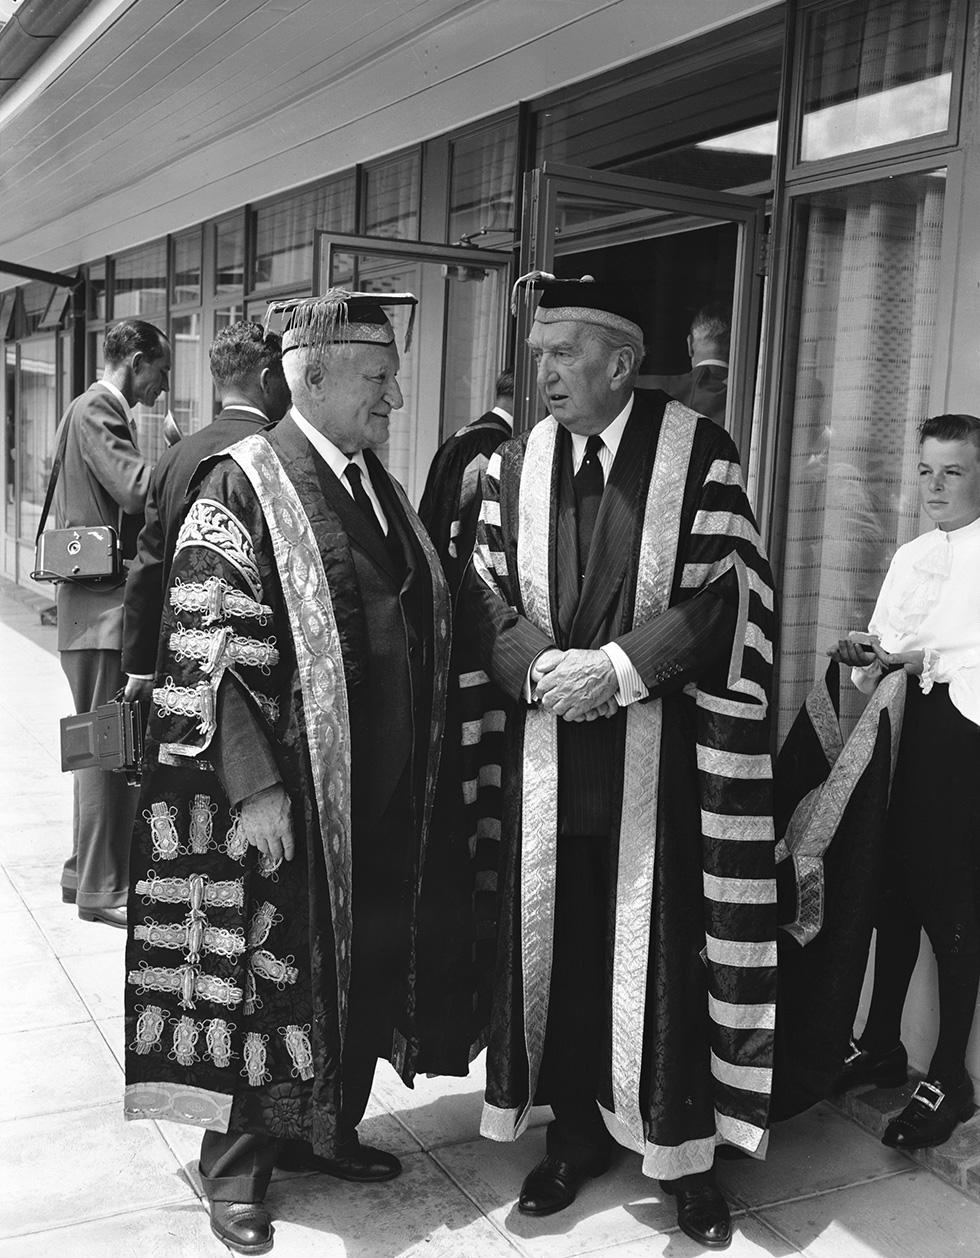 Lord Bruce and Sir Earle Page at the Australian National University.